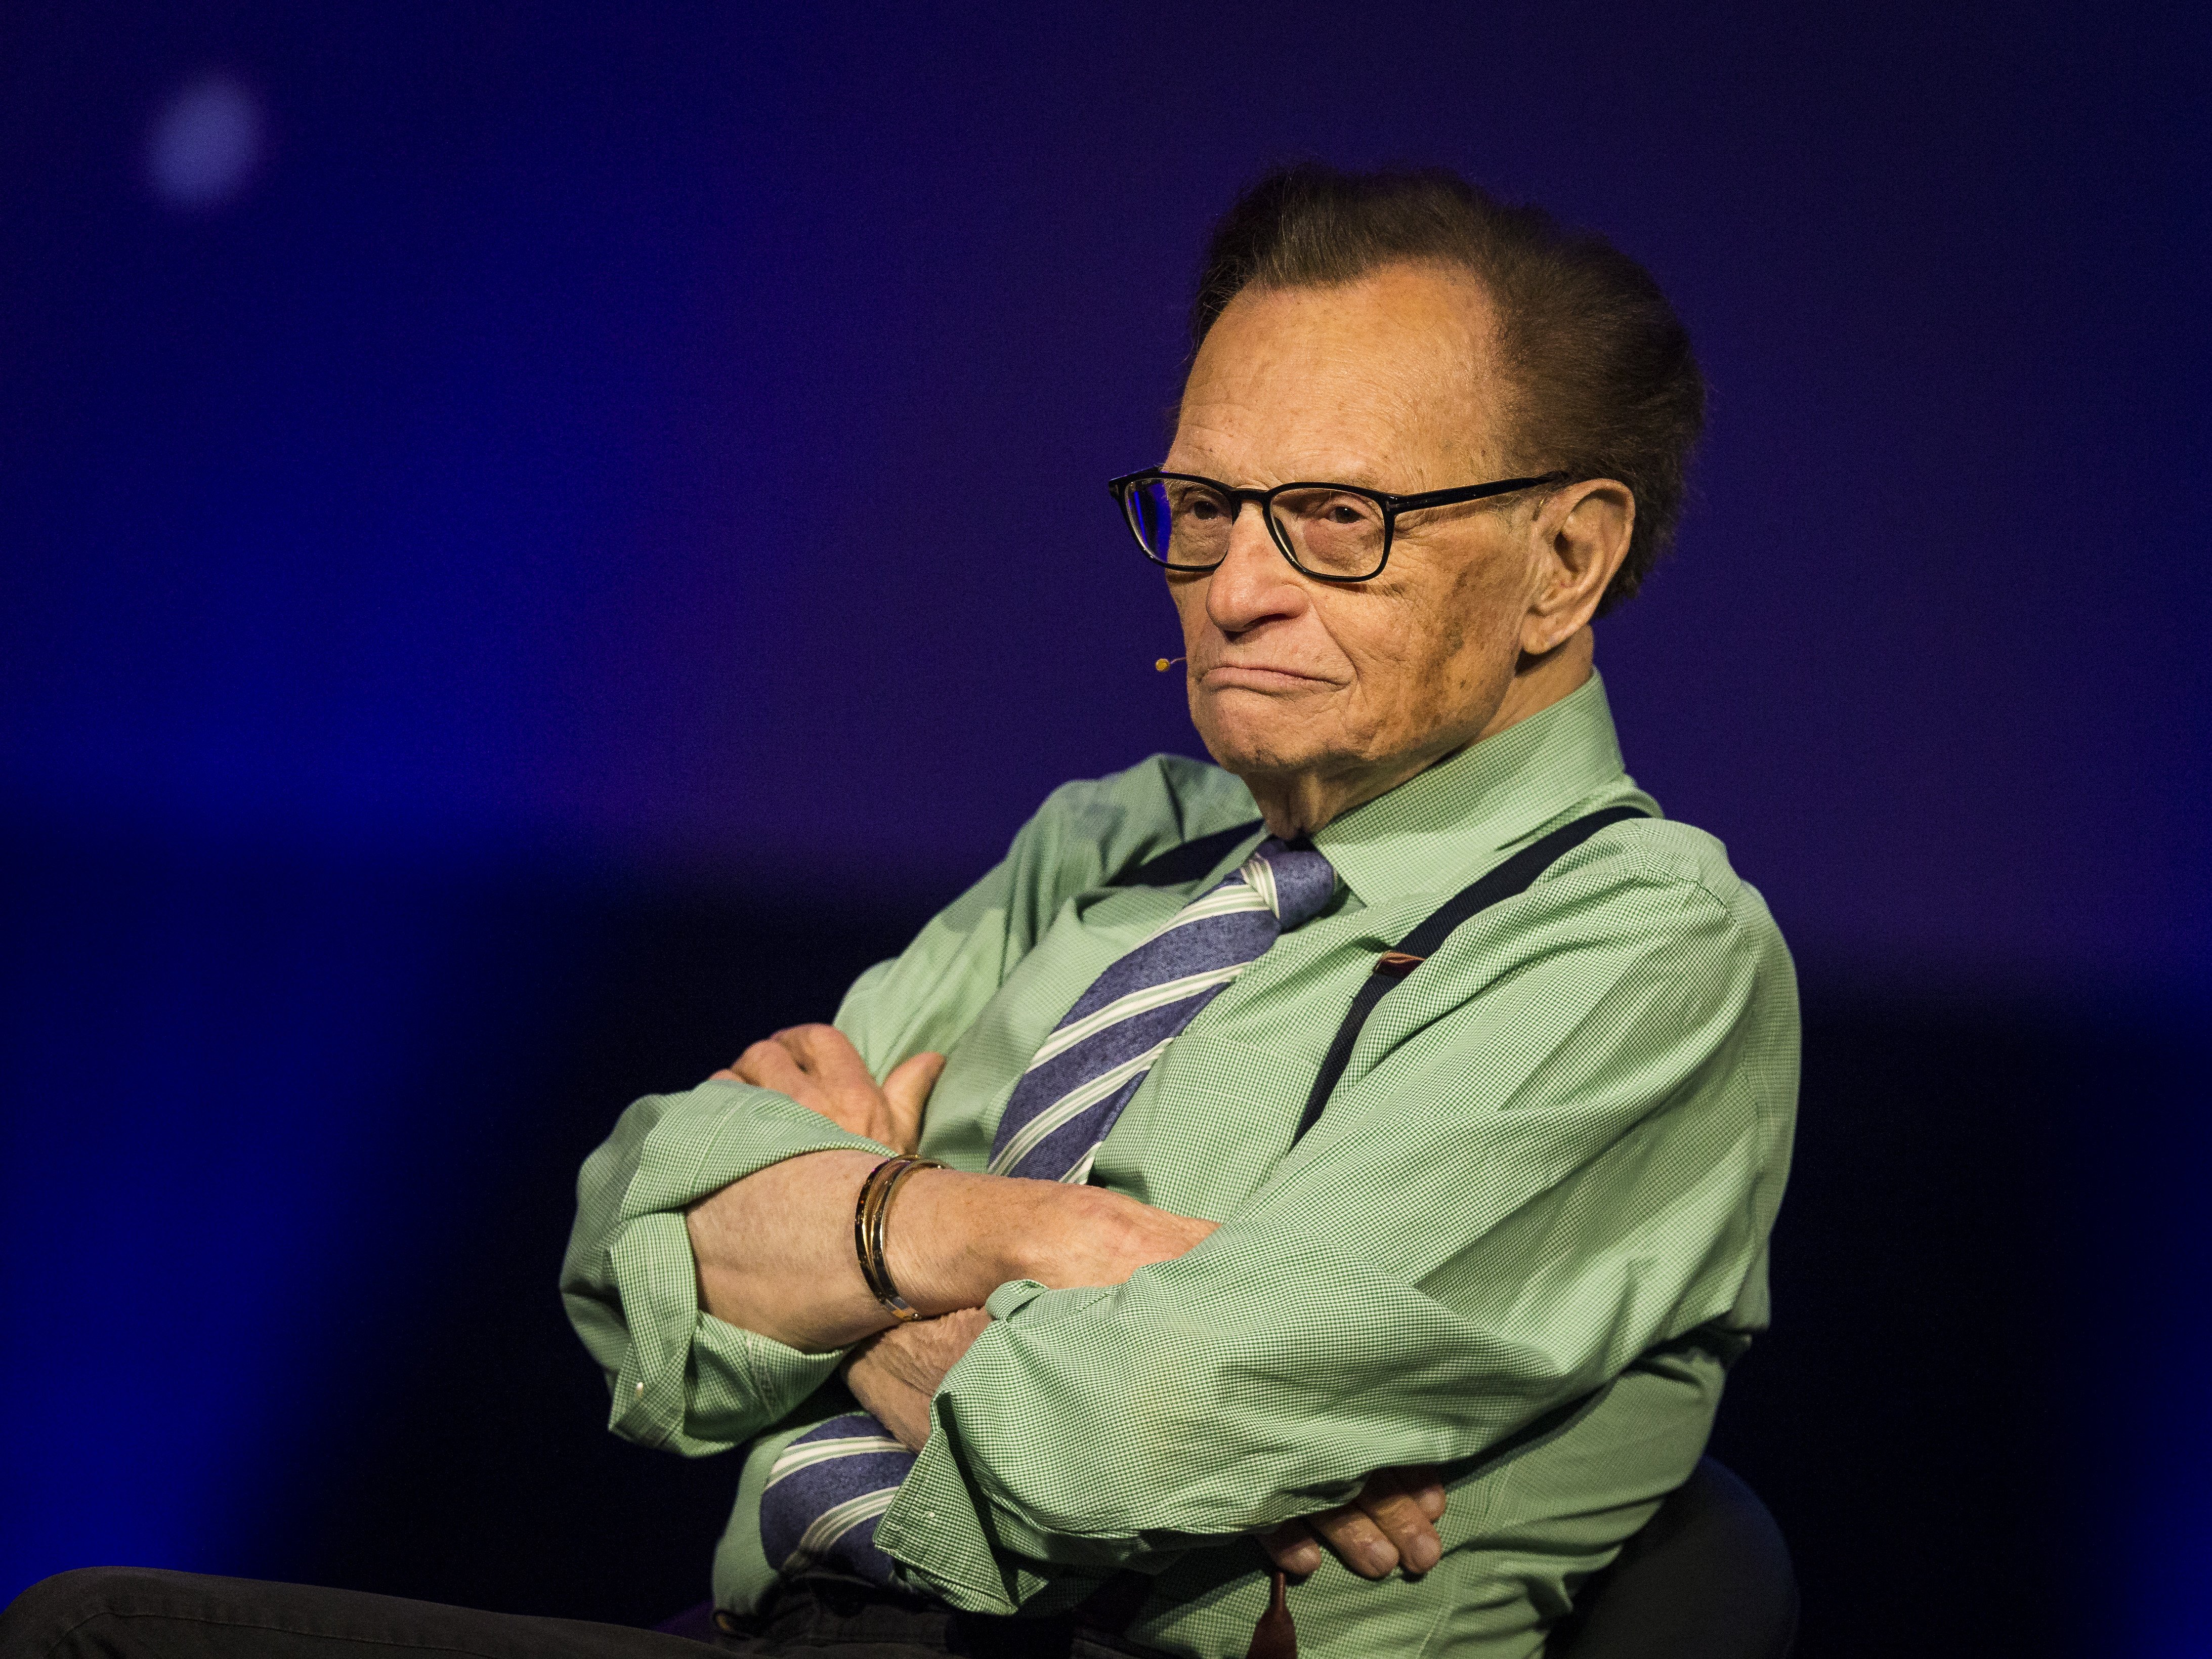 Larry King participates on a discussion on fake news in the media during the Starmus Festival on June 21, 2017, in Trondheim, Norway. | Source: Getty Images.